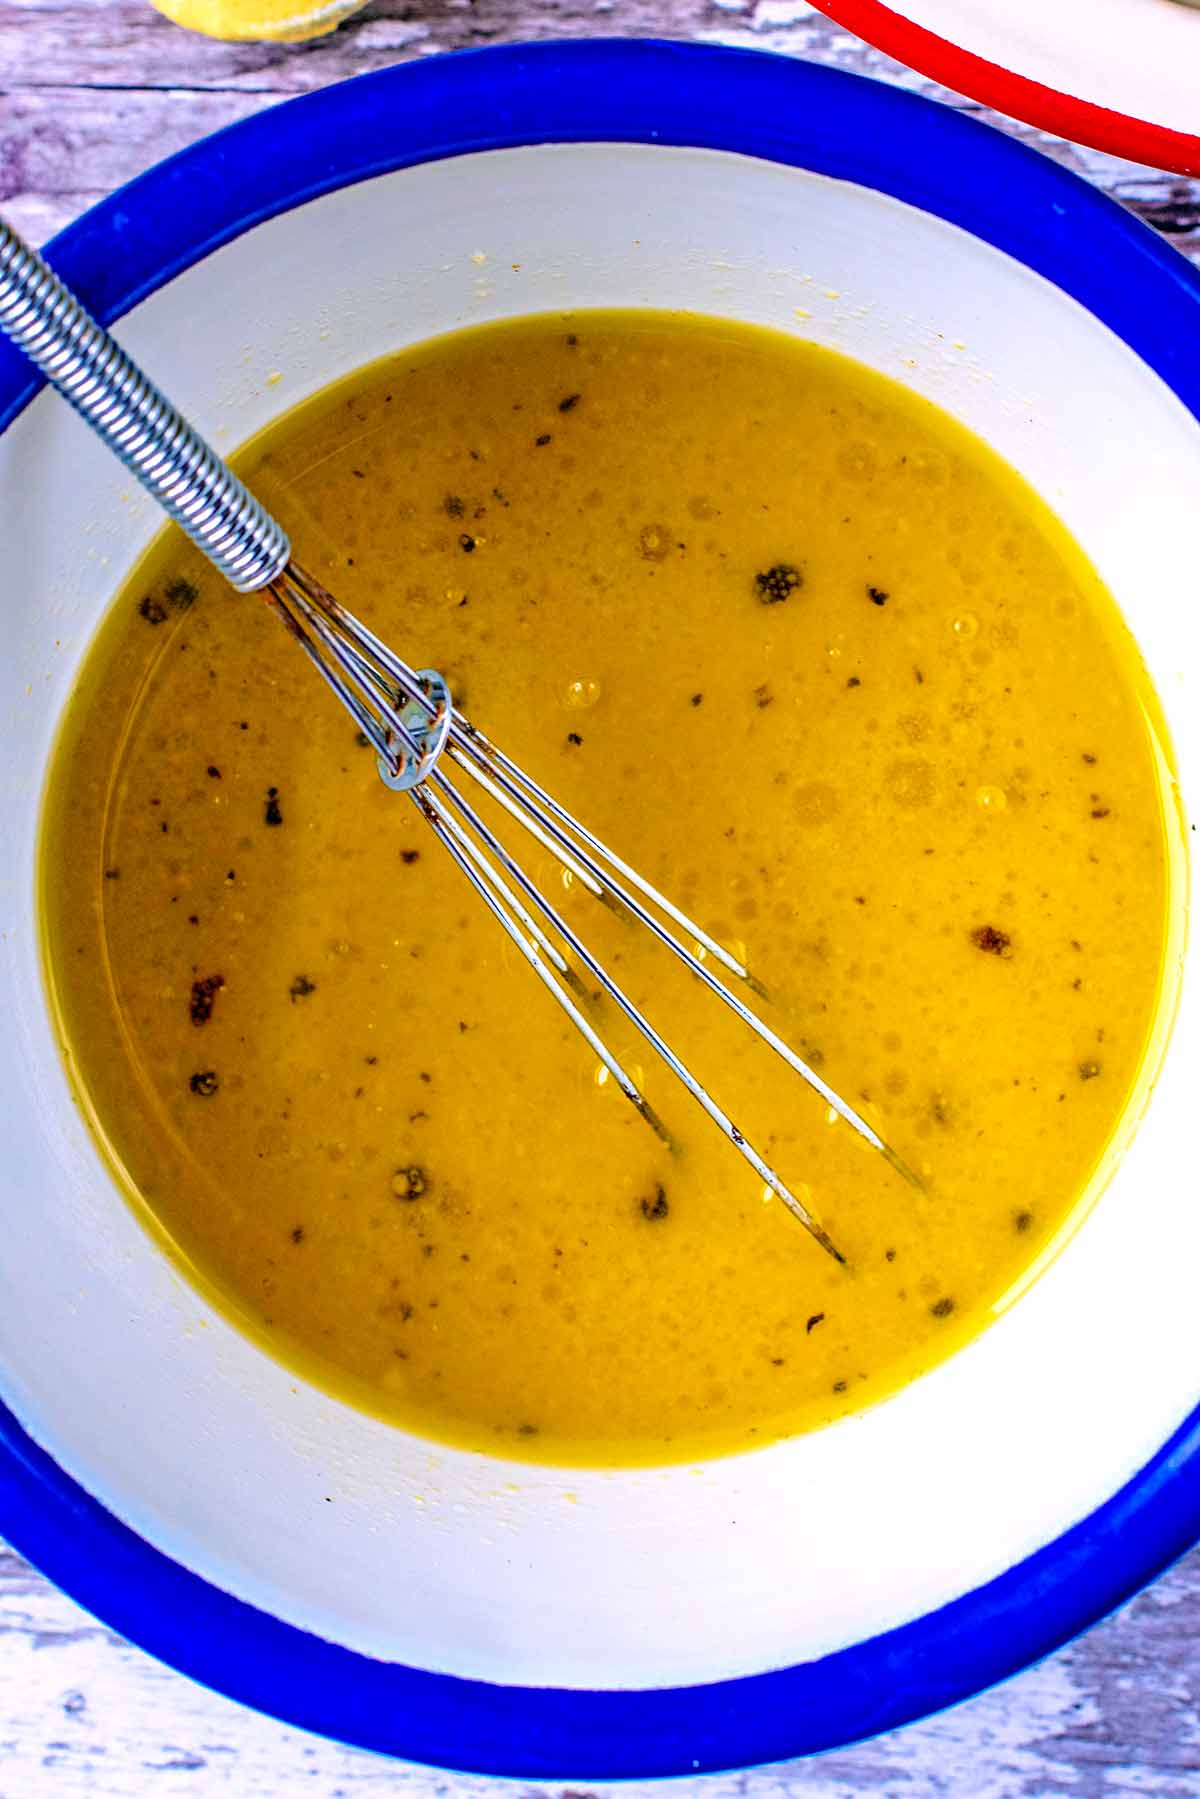 Salad dressing in a bowl with a small whisk.